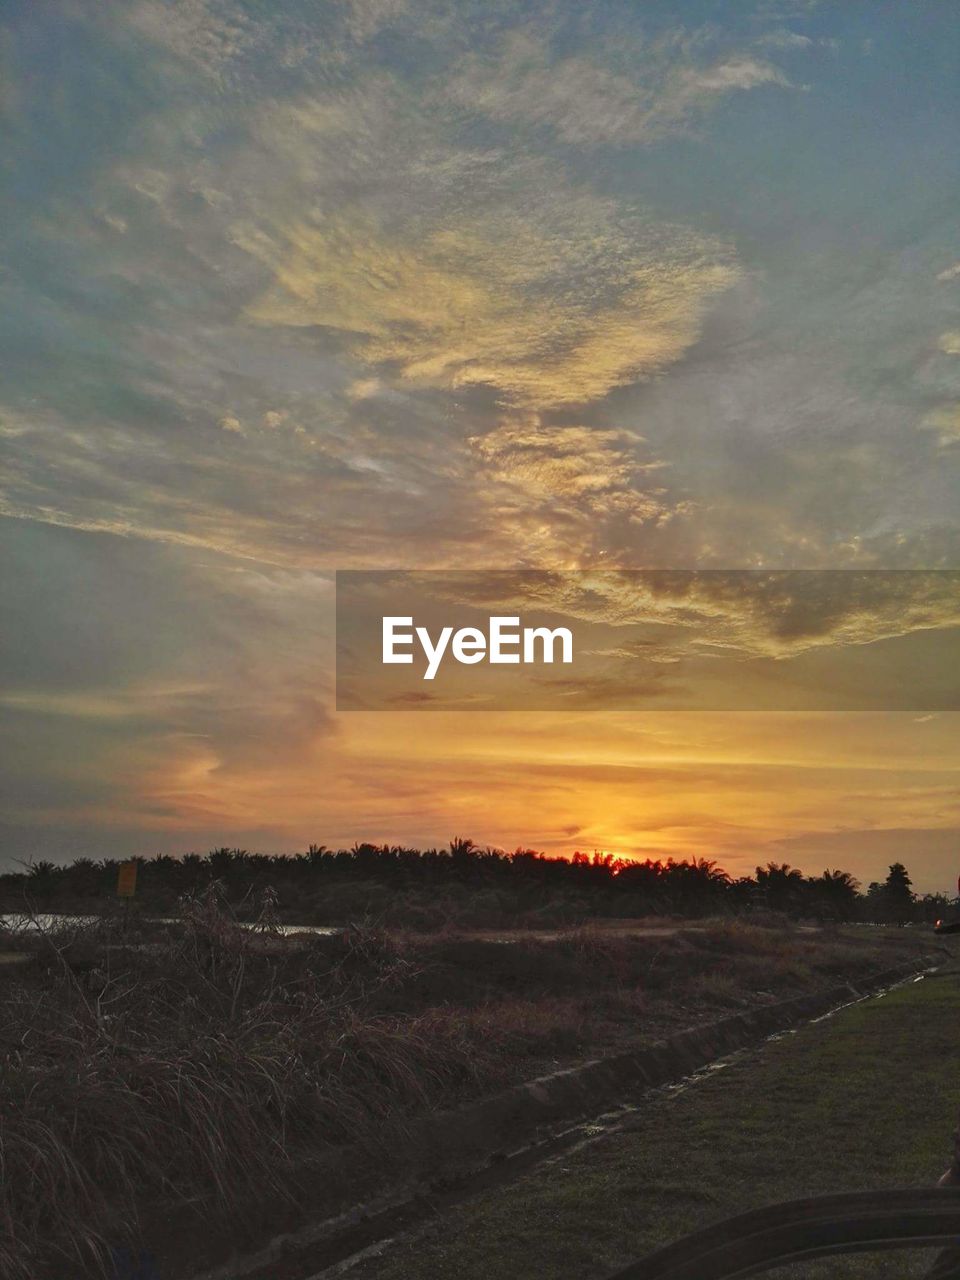 SCENIC VIEW OF AGRICULTURAL FIELD AGAINST SKY AT SUNSET